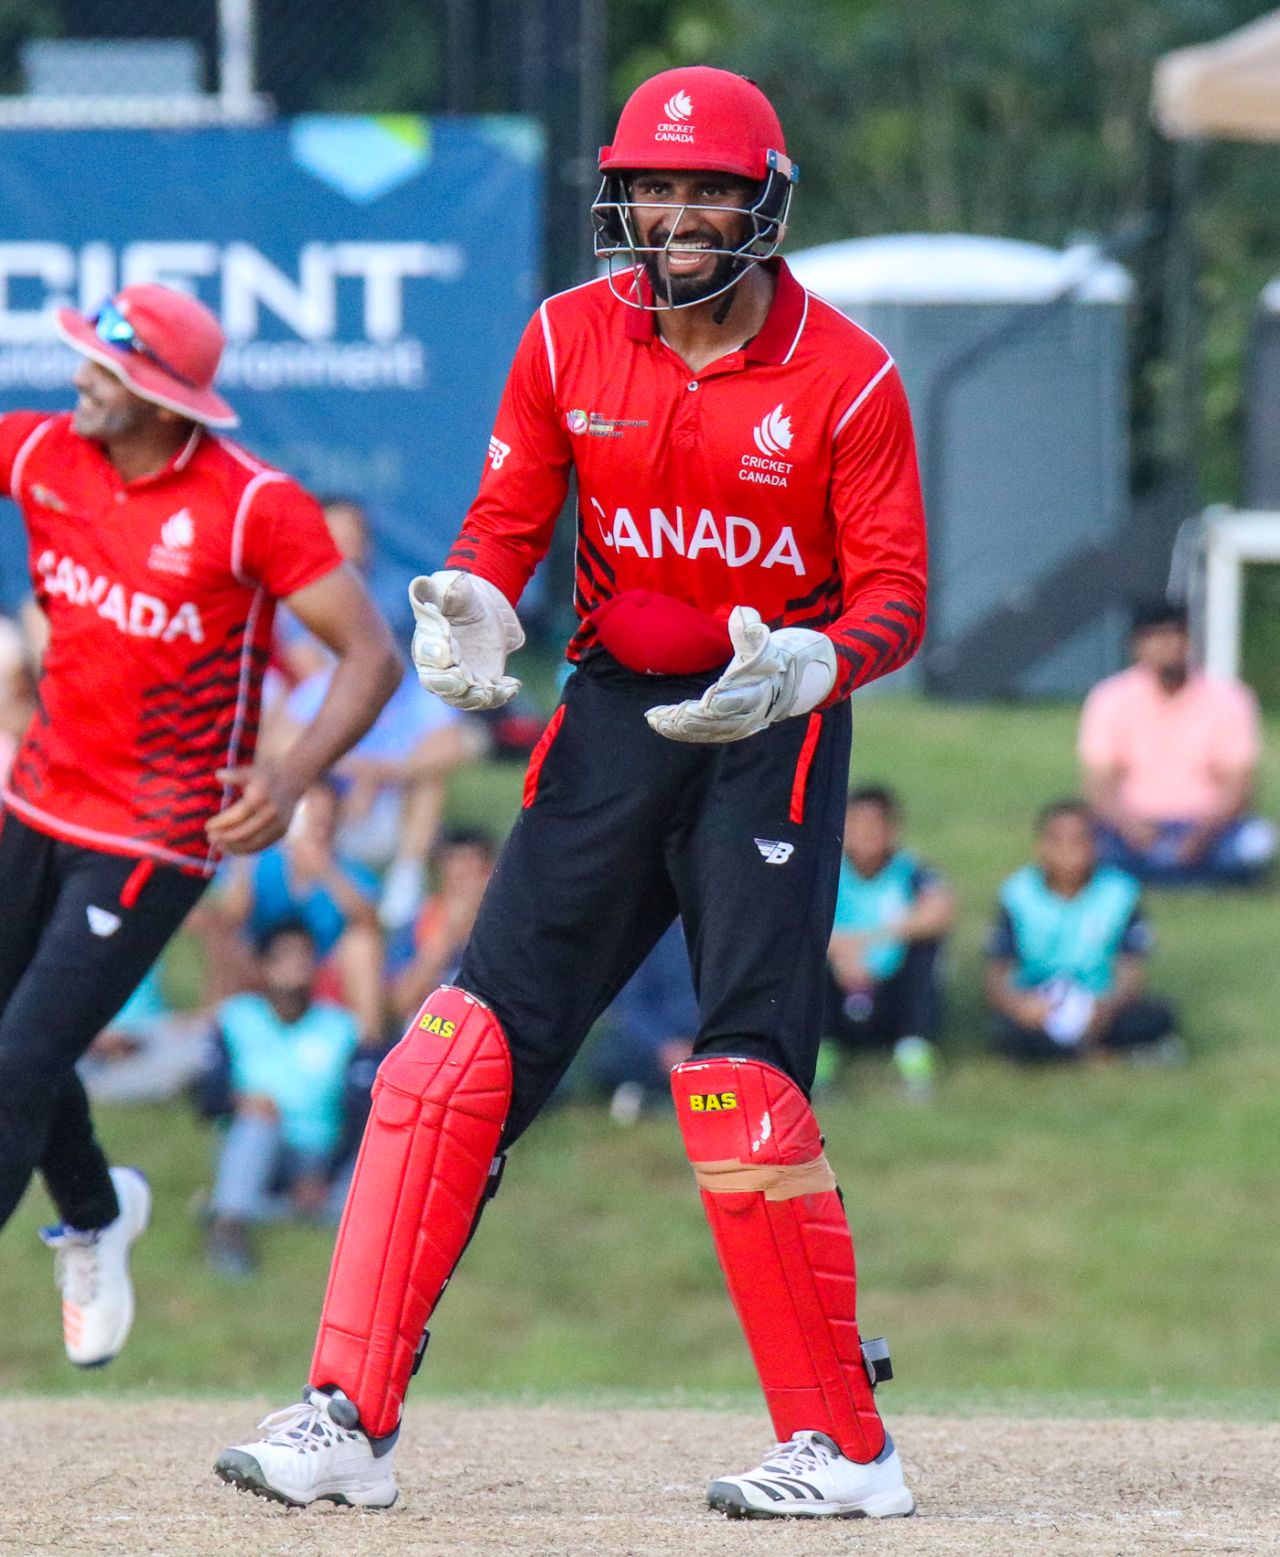 Hamza Tariq celebrates after whipping off the bails to complete a runout, USA v Canada, ICC World Twenty20 Americas Sub Regional Qualifier A, Morrisville, September 22, 2018